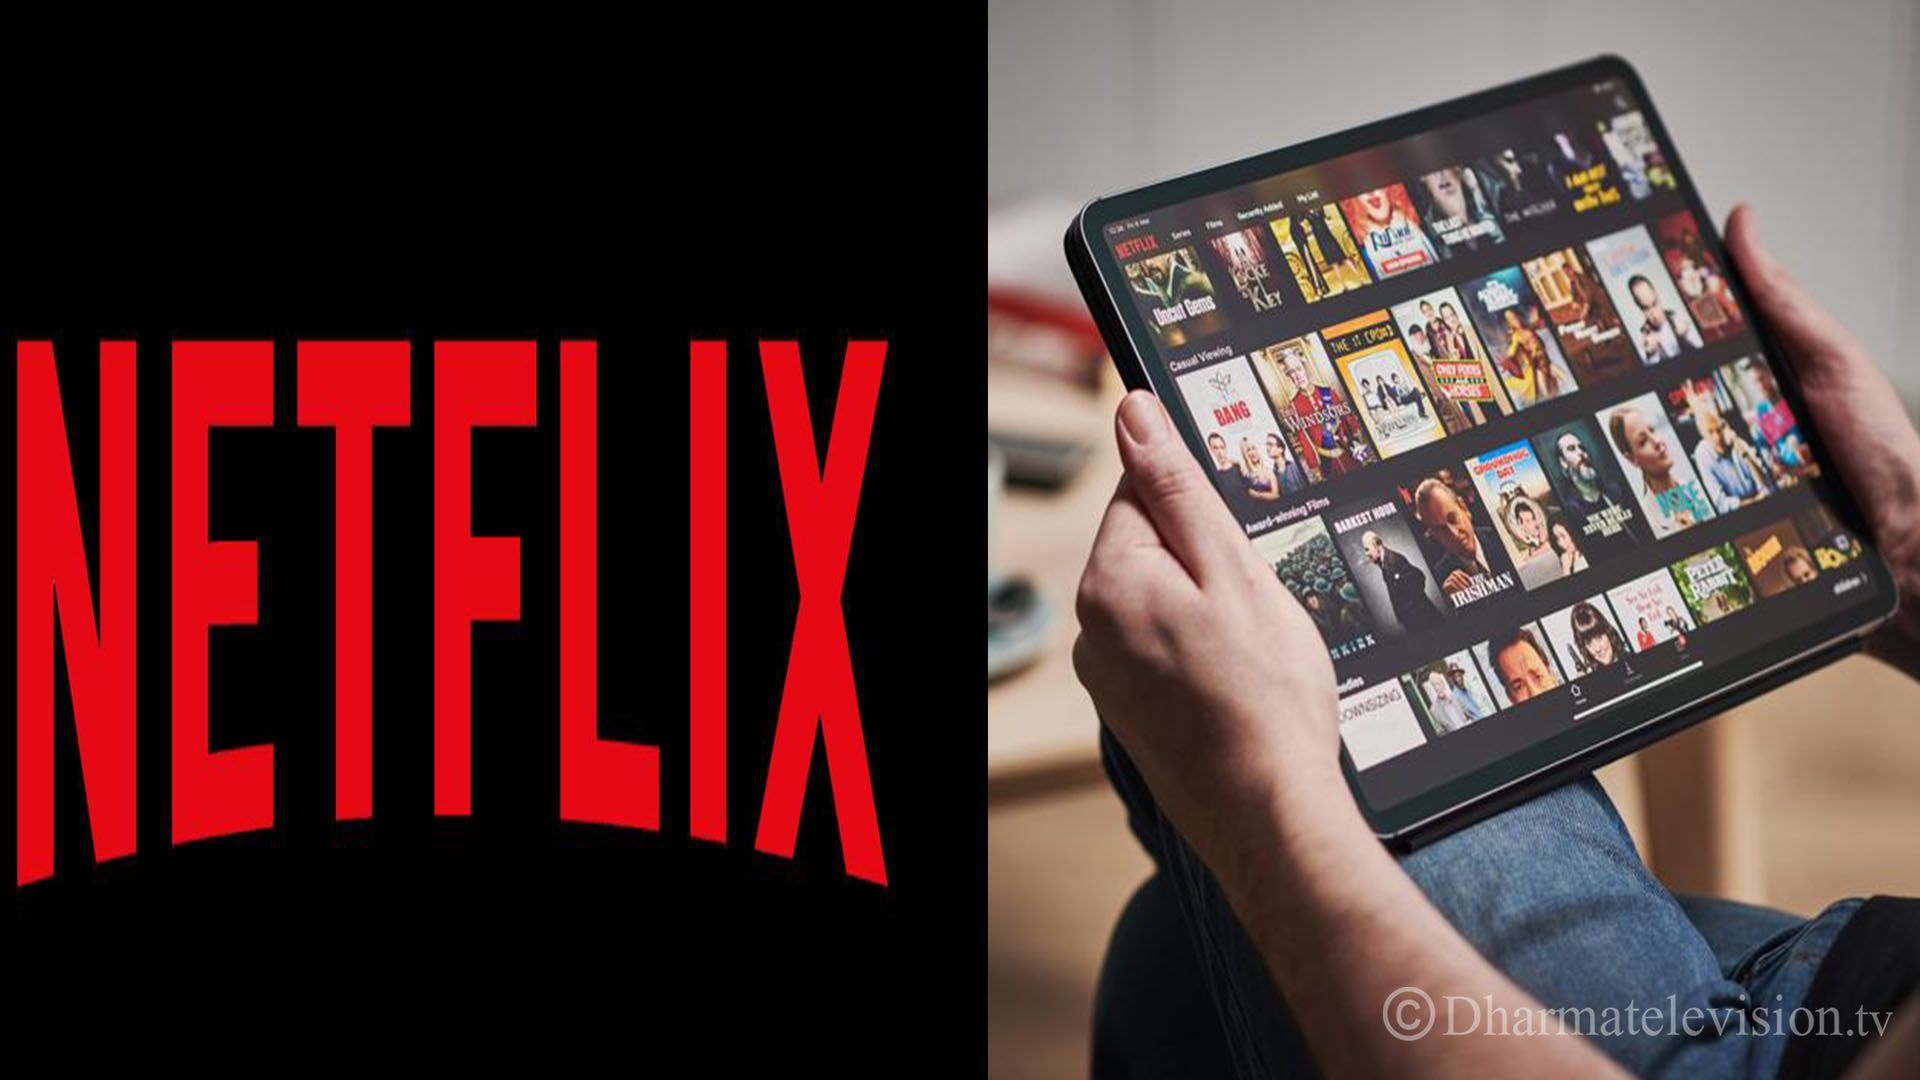 Netflix trialing to crackdown on password sharing